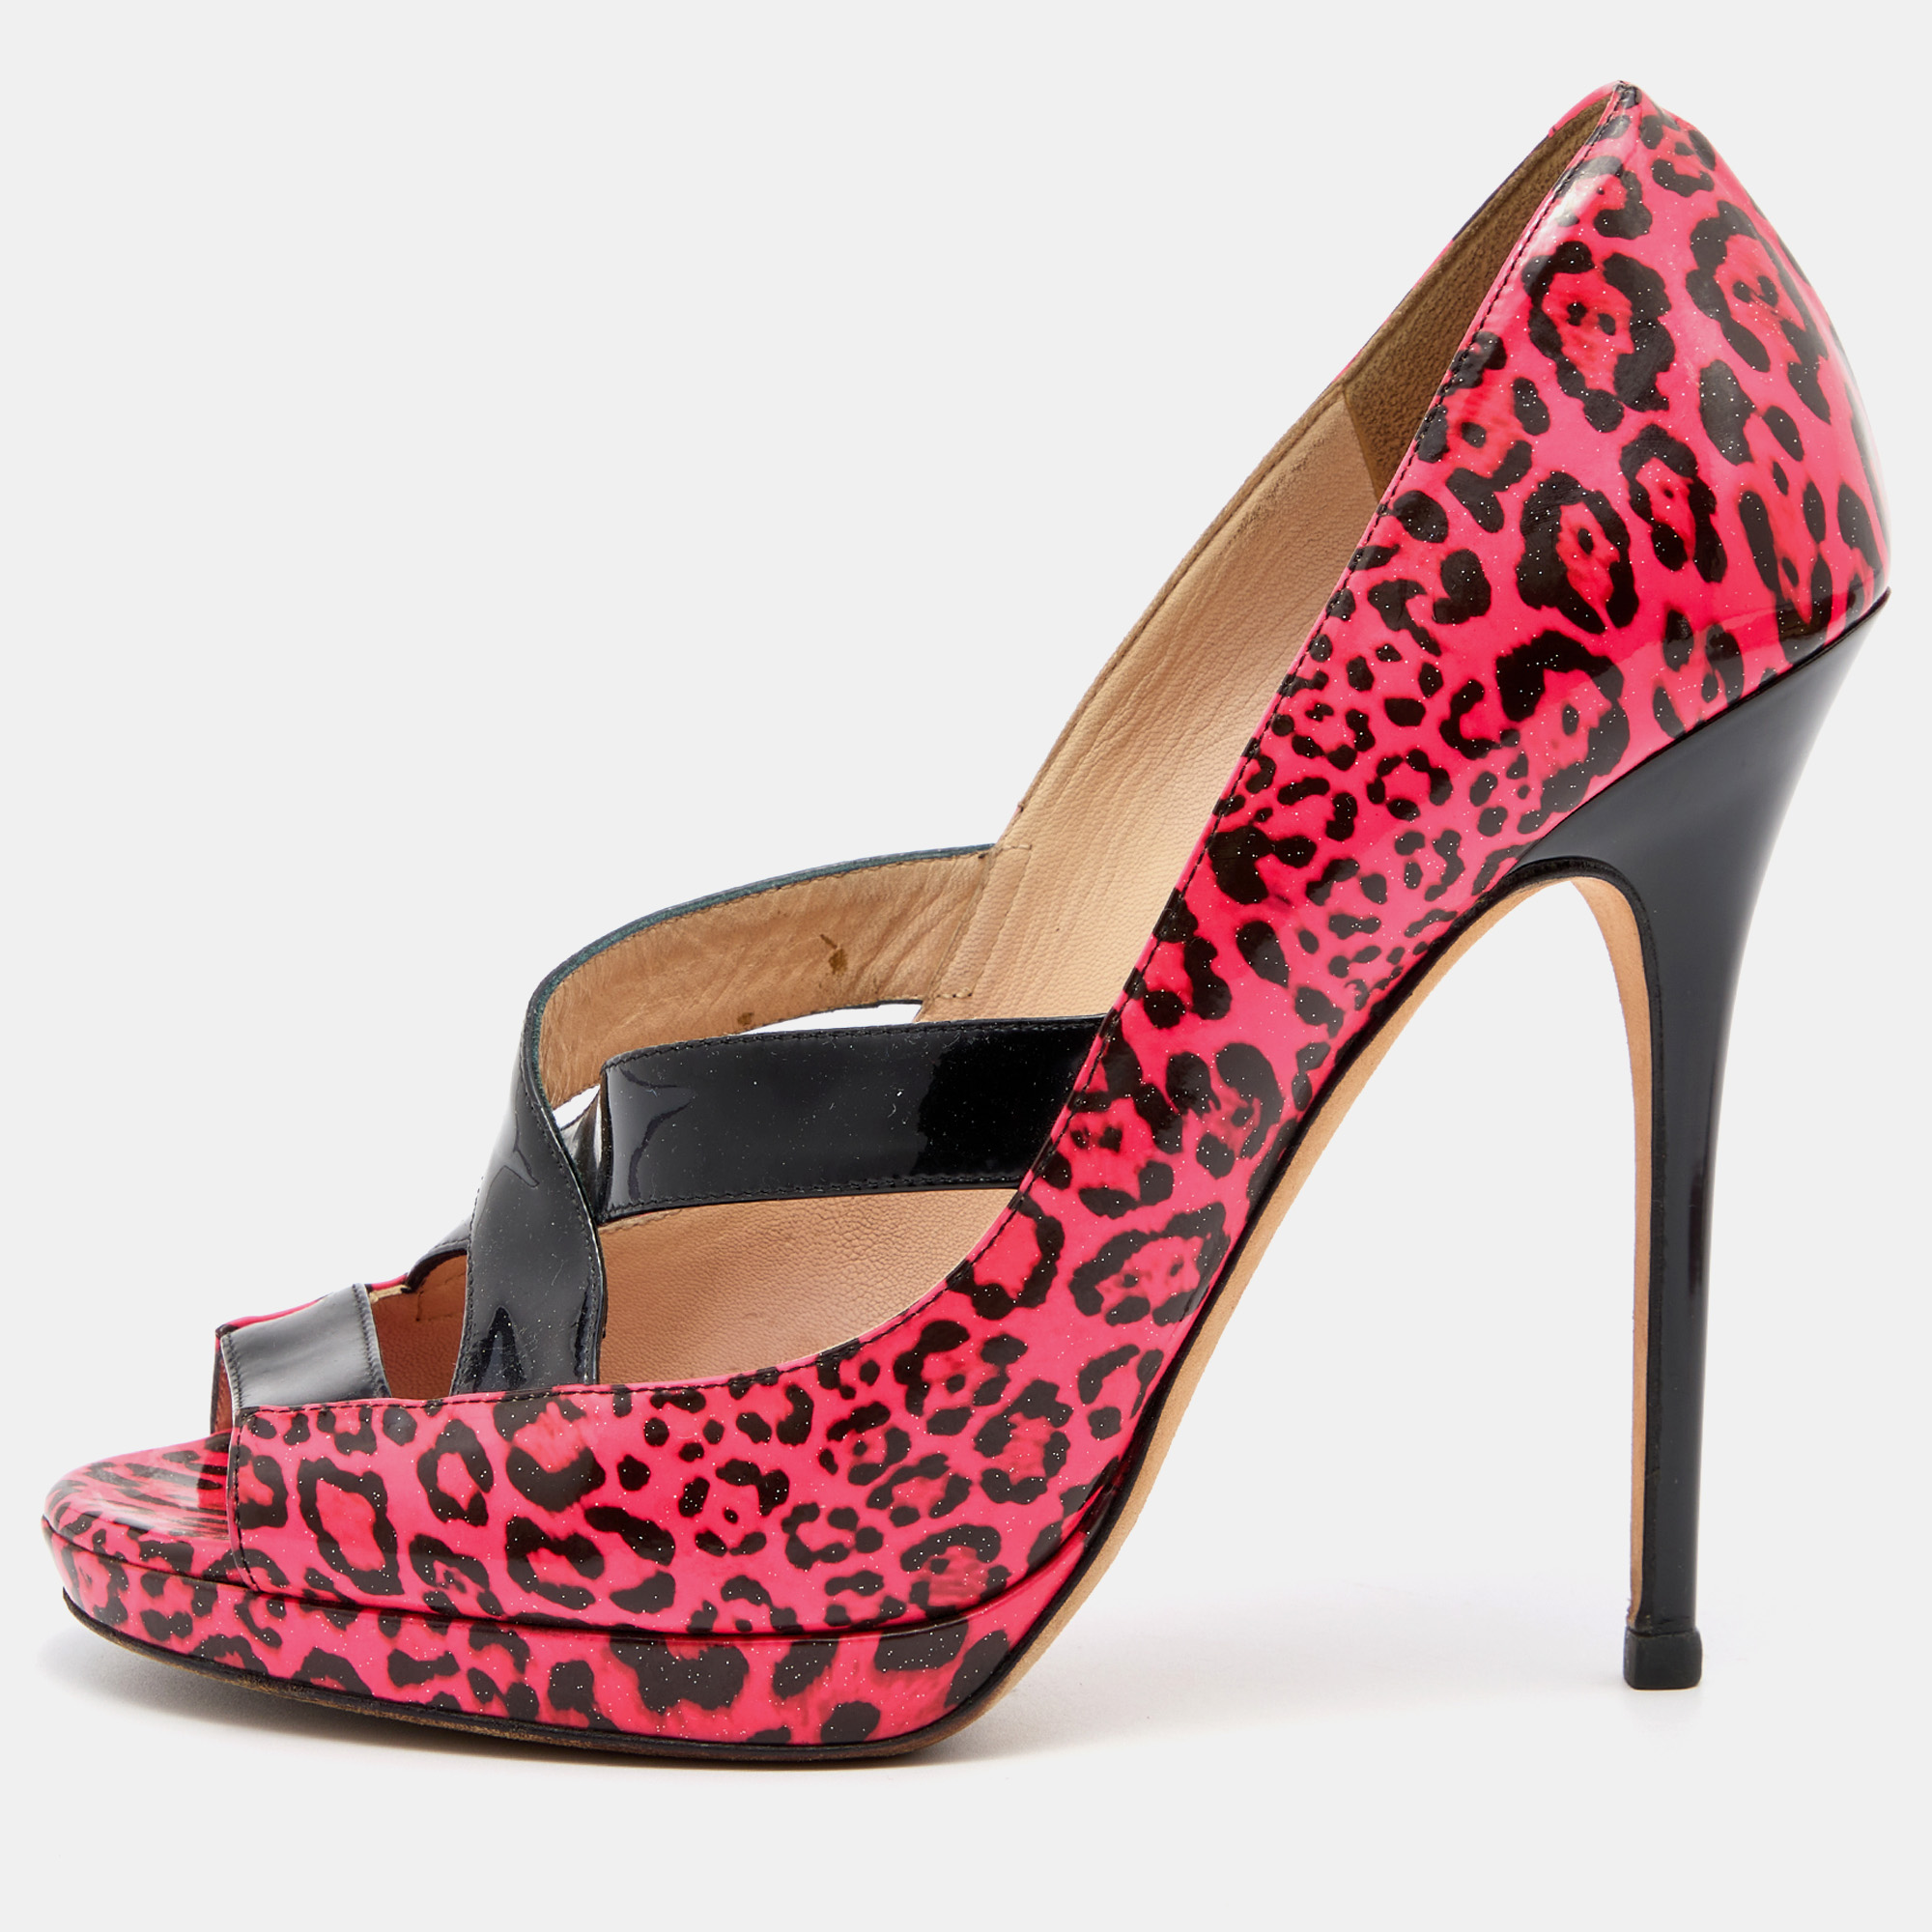 Pre-owned Jimmy Choo Pink Leopard Print Patent Leather Open Toe Pumps Size 39